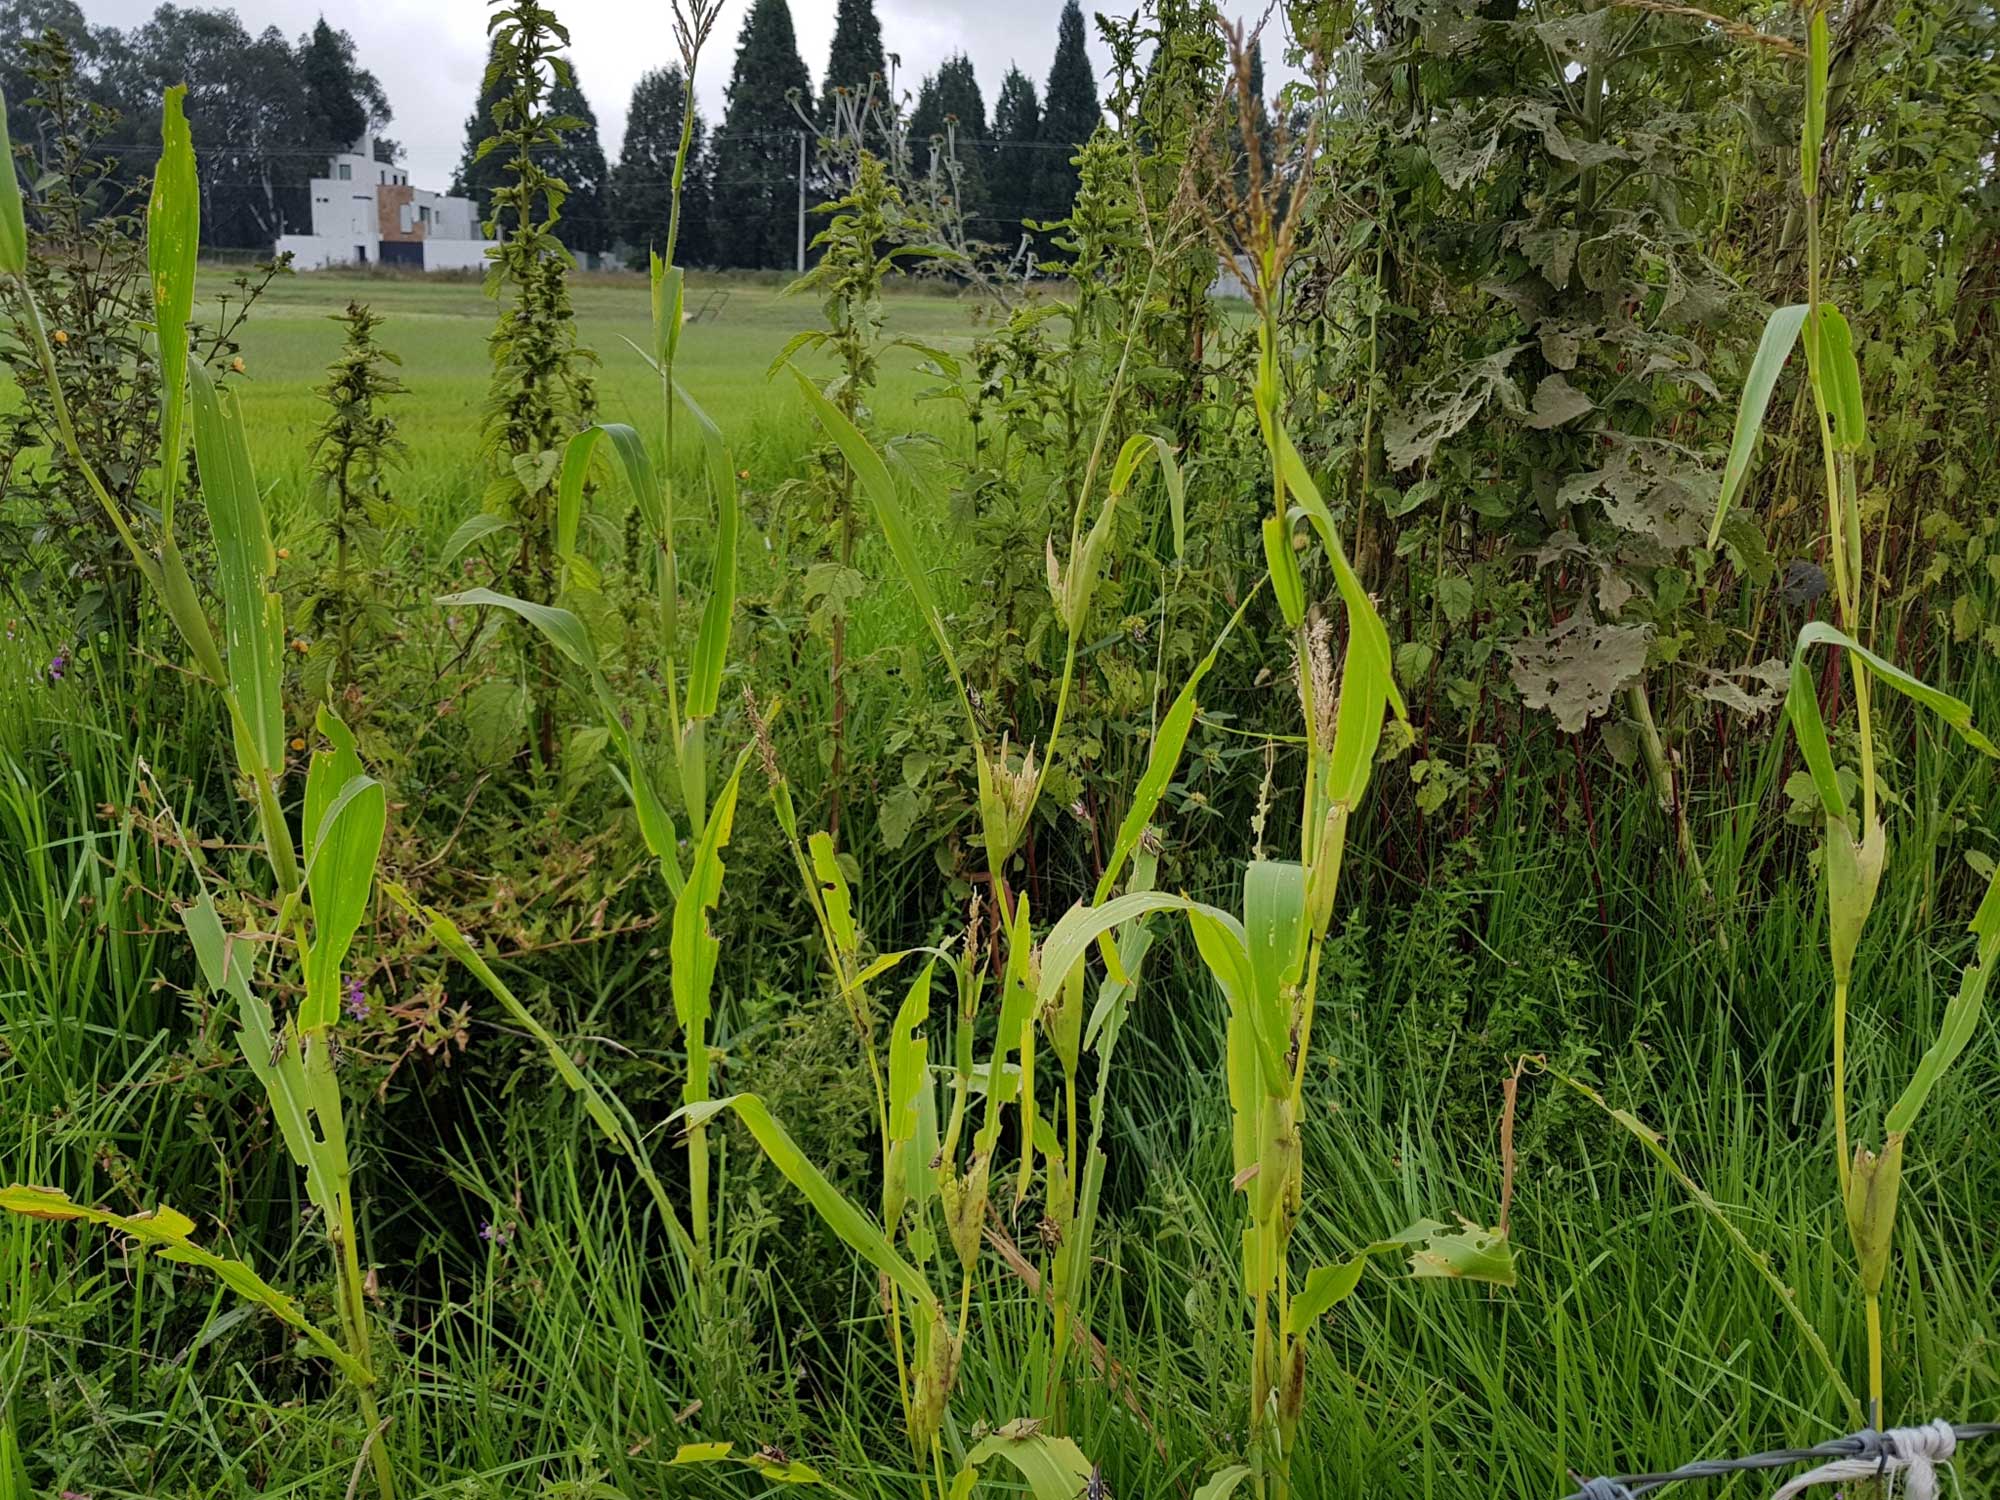 Photograph of Mexican teosinte plants. The photo shows a row of corn-like plants with heavy insect damage on the leaves growing among other, shorter grasses. Behind the plants are taller broad-leaved plants, with a field and a row of tall conifers in the background.